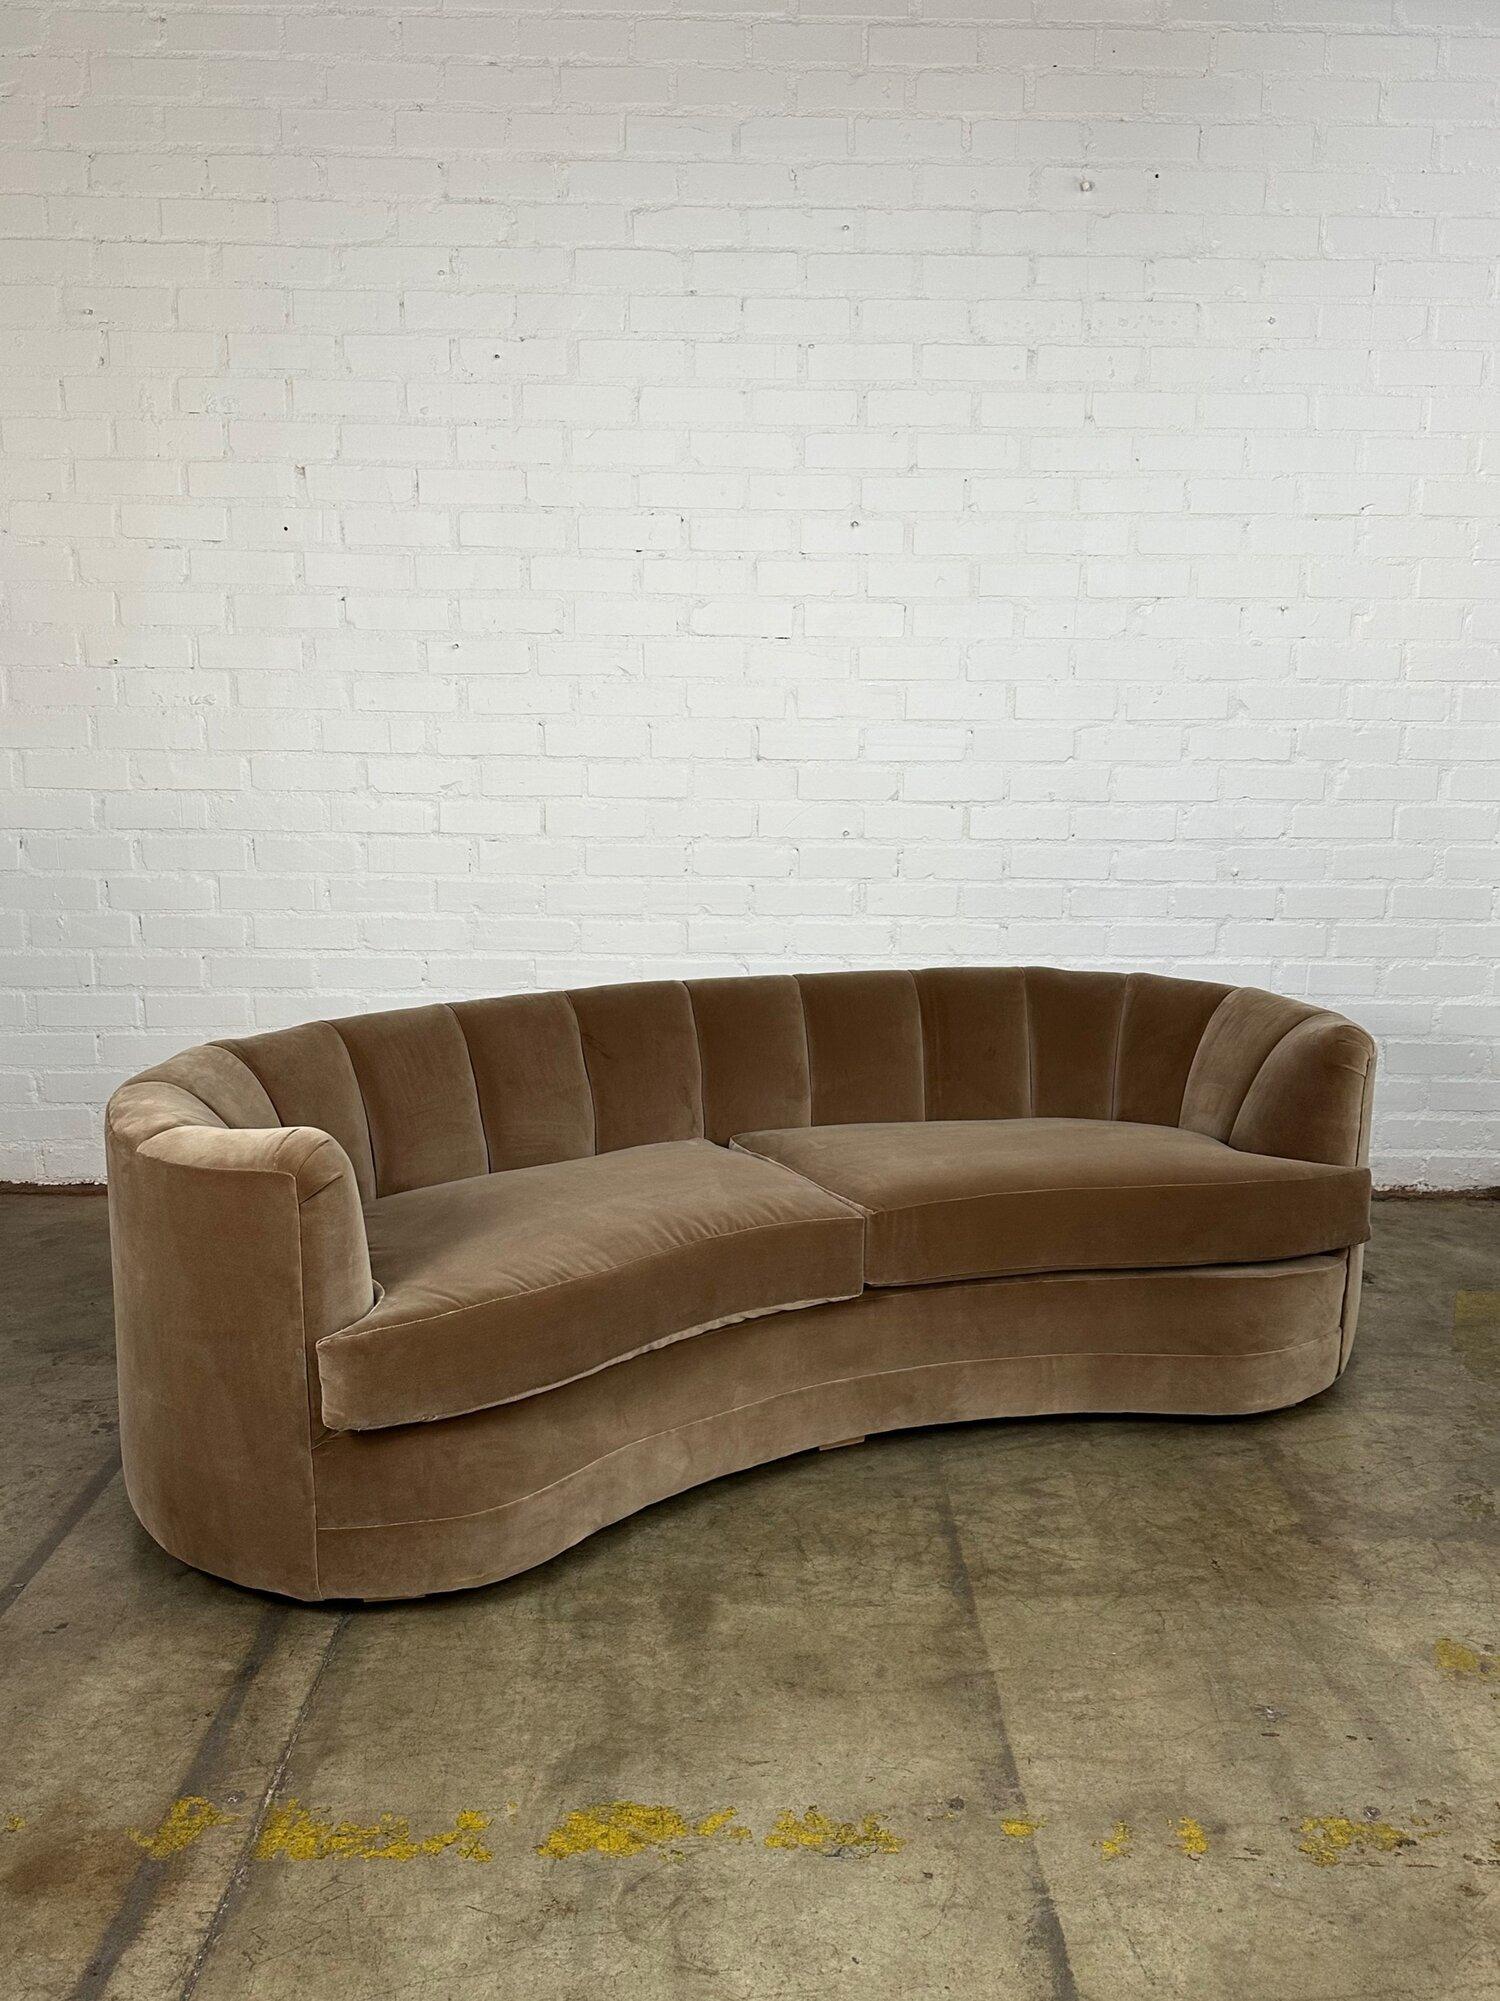 Mid-Century Modern Art Deco Kidney Sofa with Channel Back